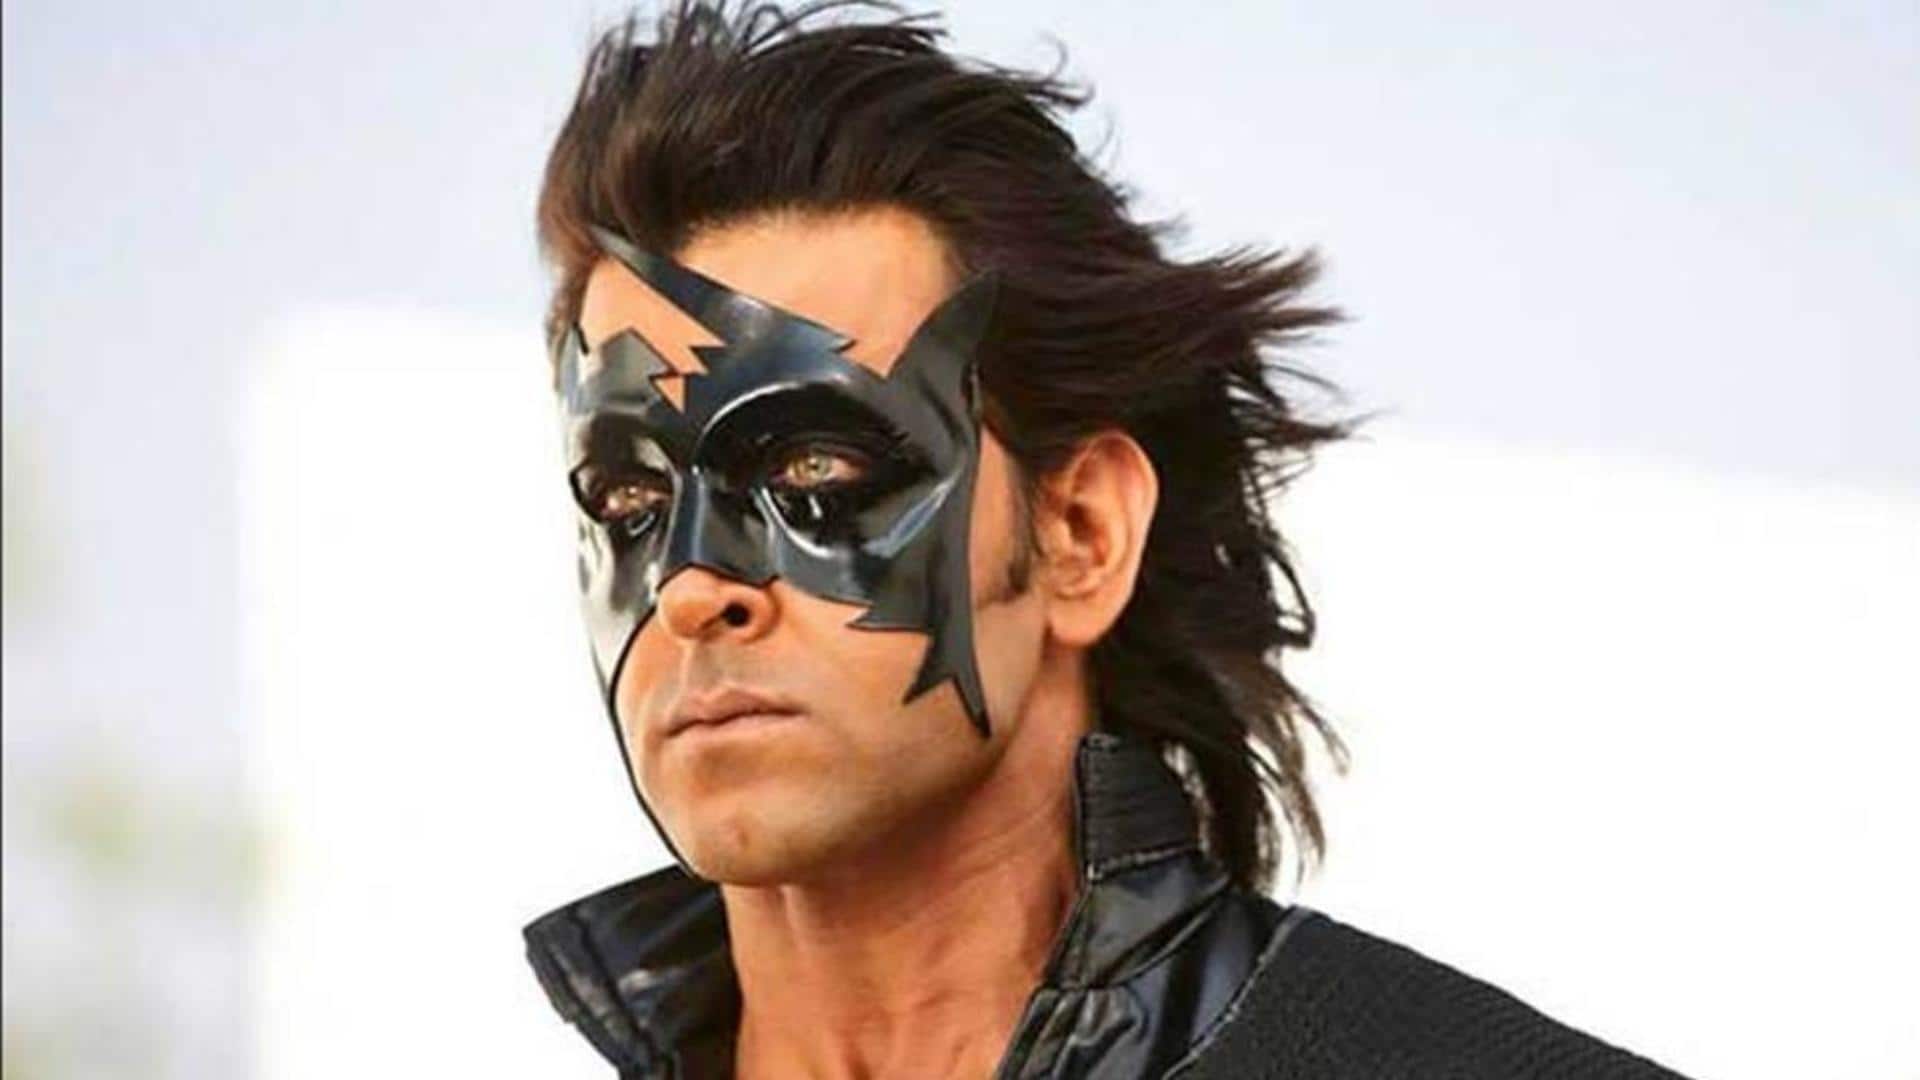 Hrithik Roshan wants Hollywood director for 'Krrish 4': Reports